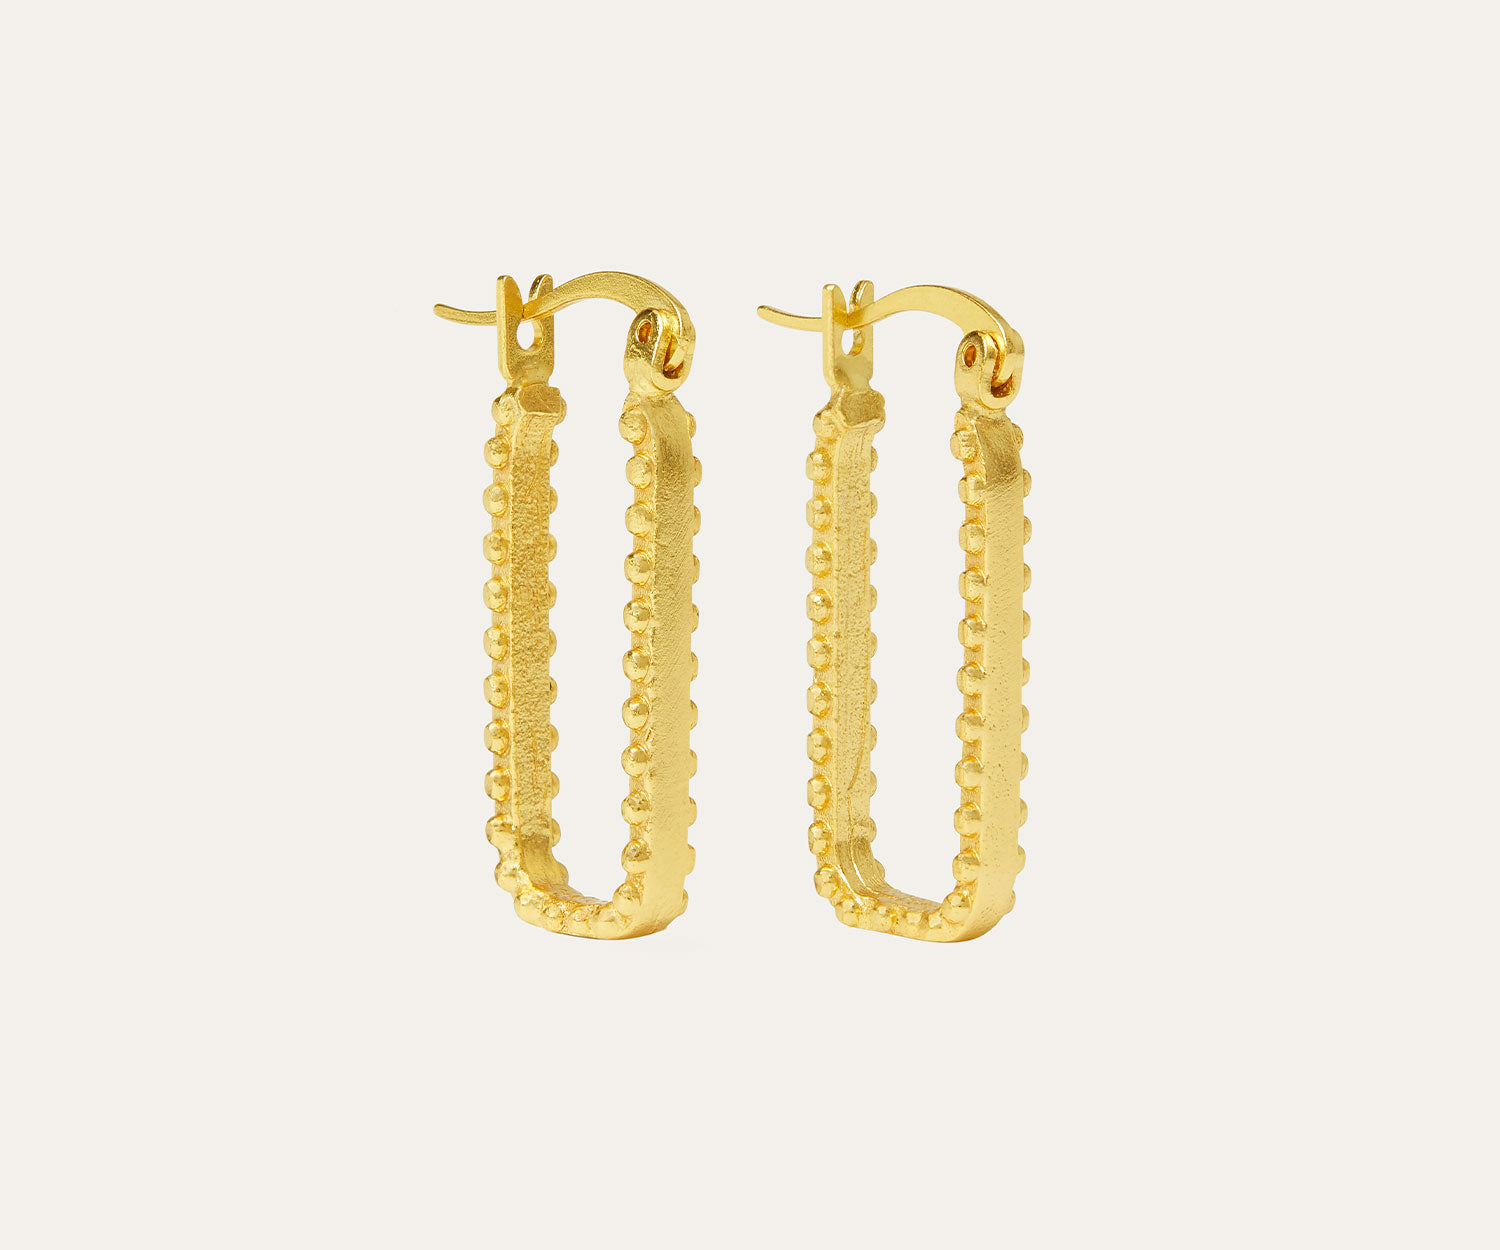 Coda Rectangle Hoop Earrings with Granulation | Sustainable Jewellery by Ottoman Hands